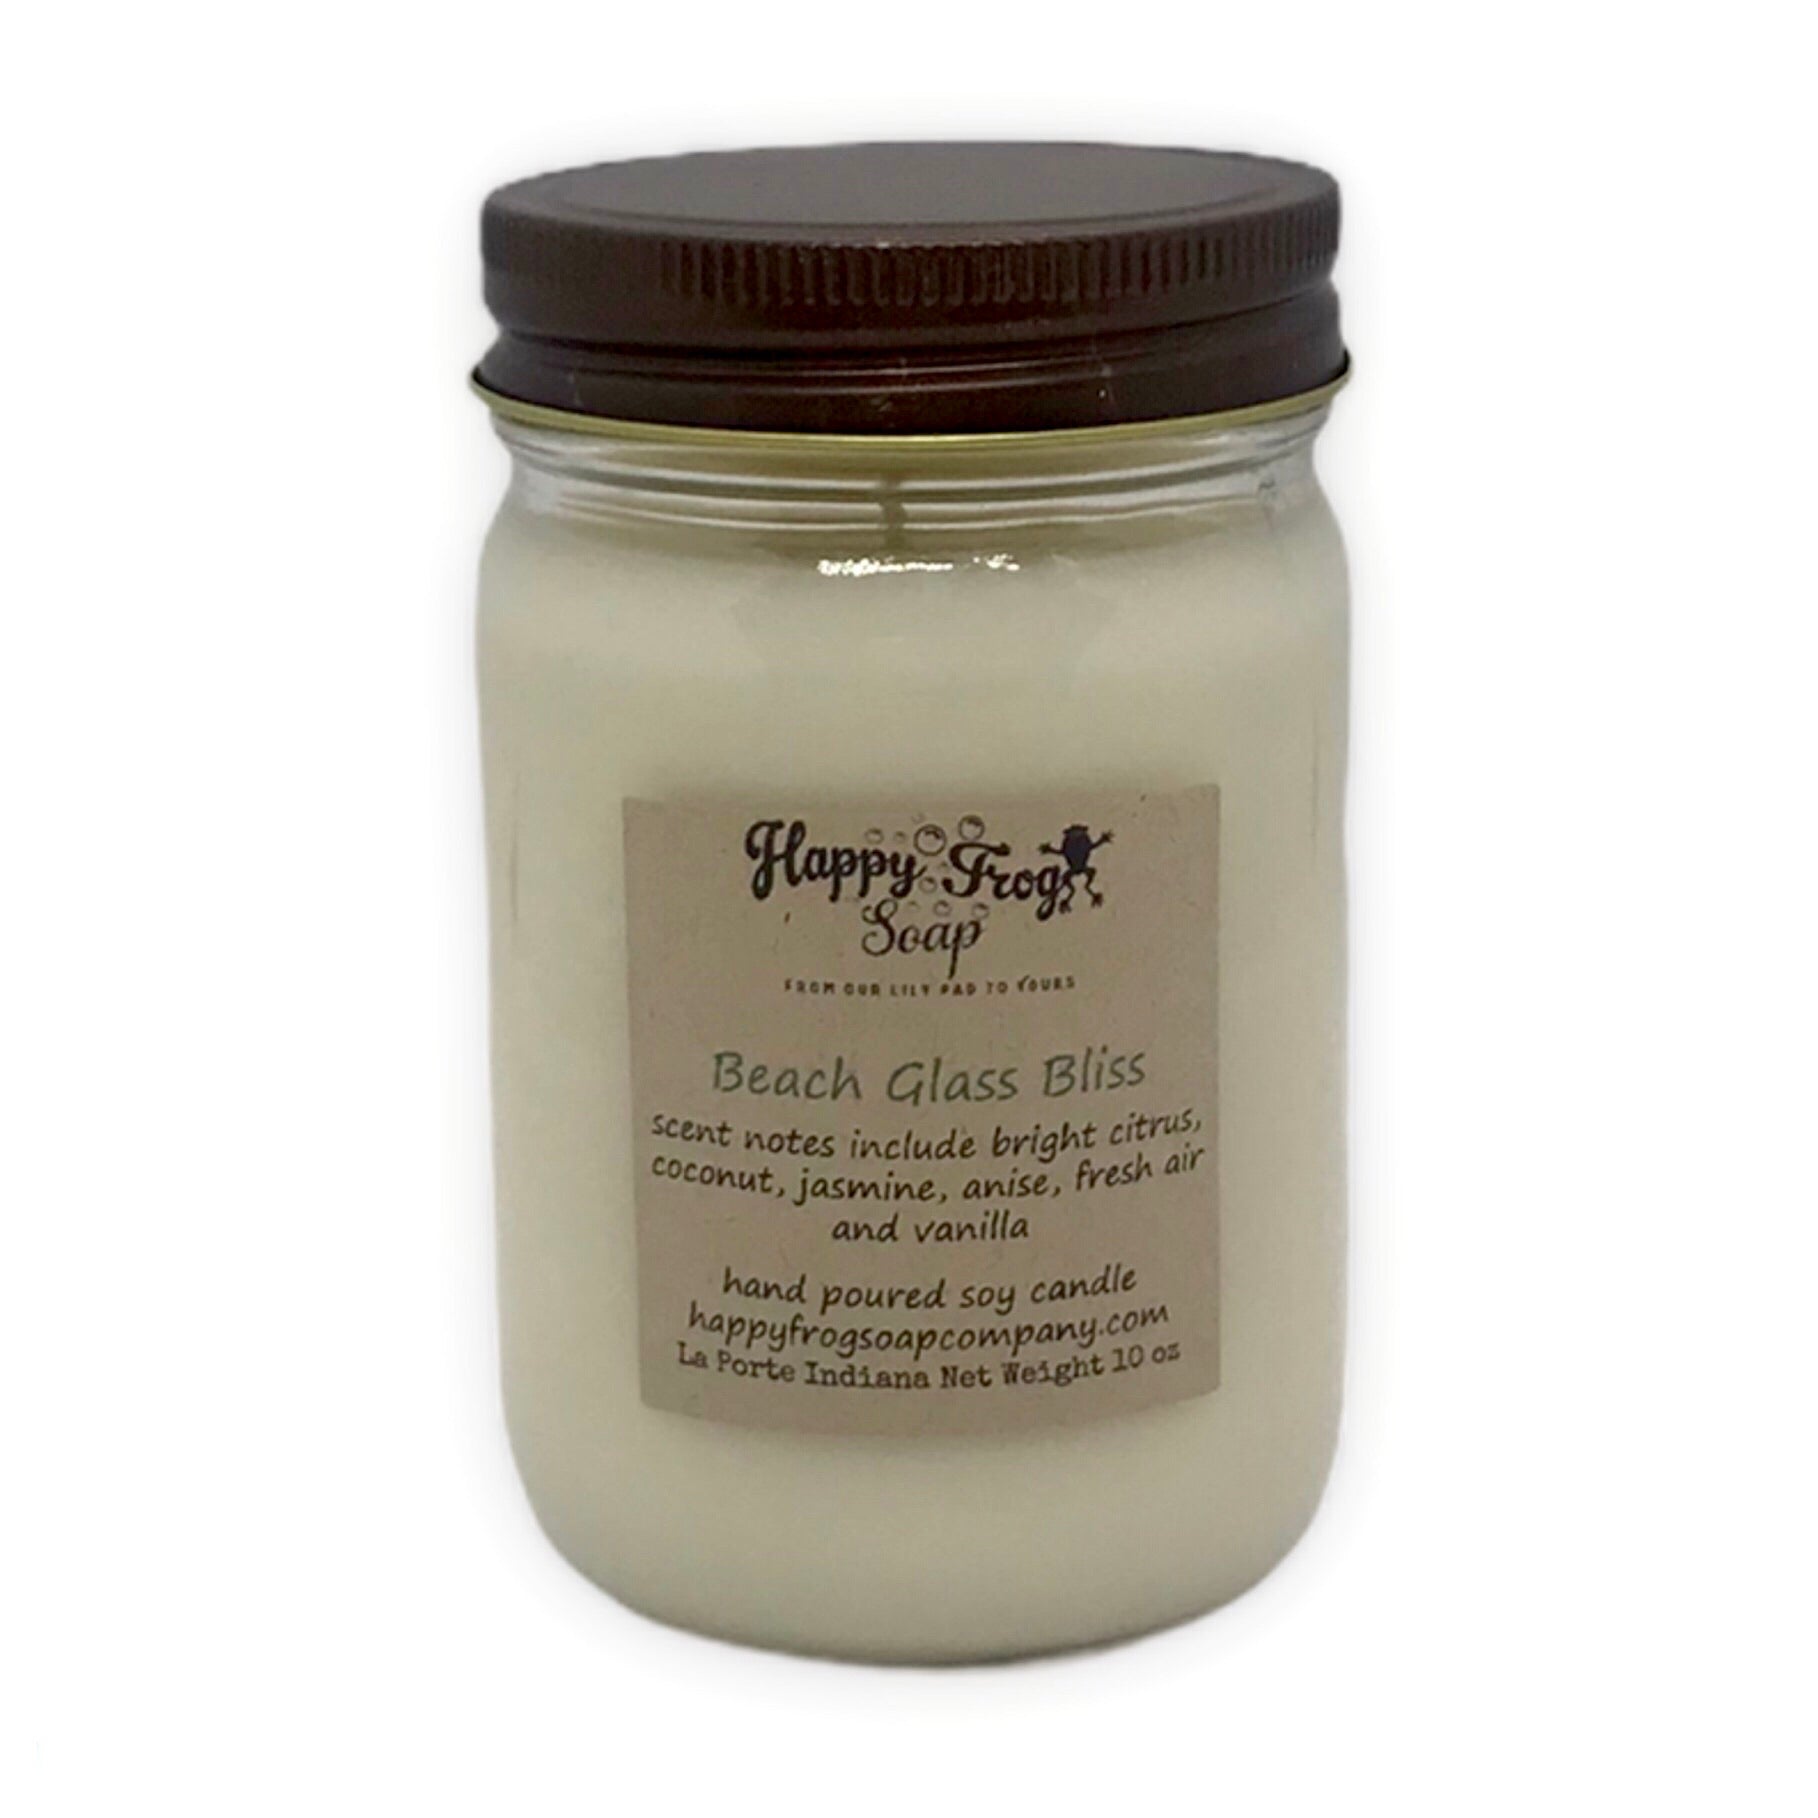 Beach Glass Bliss Soy Candle